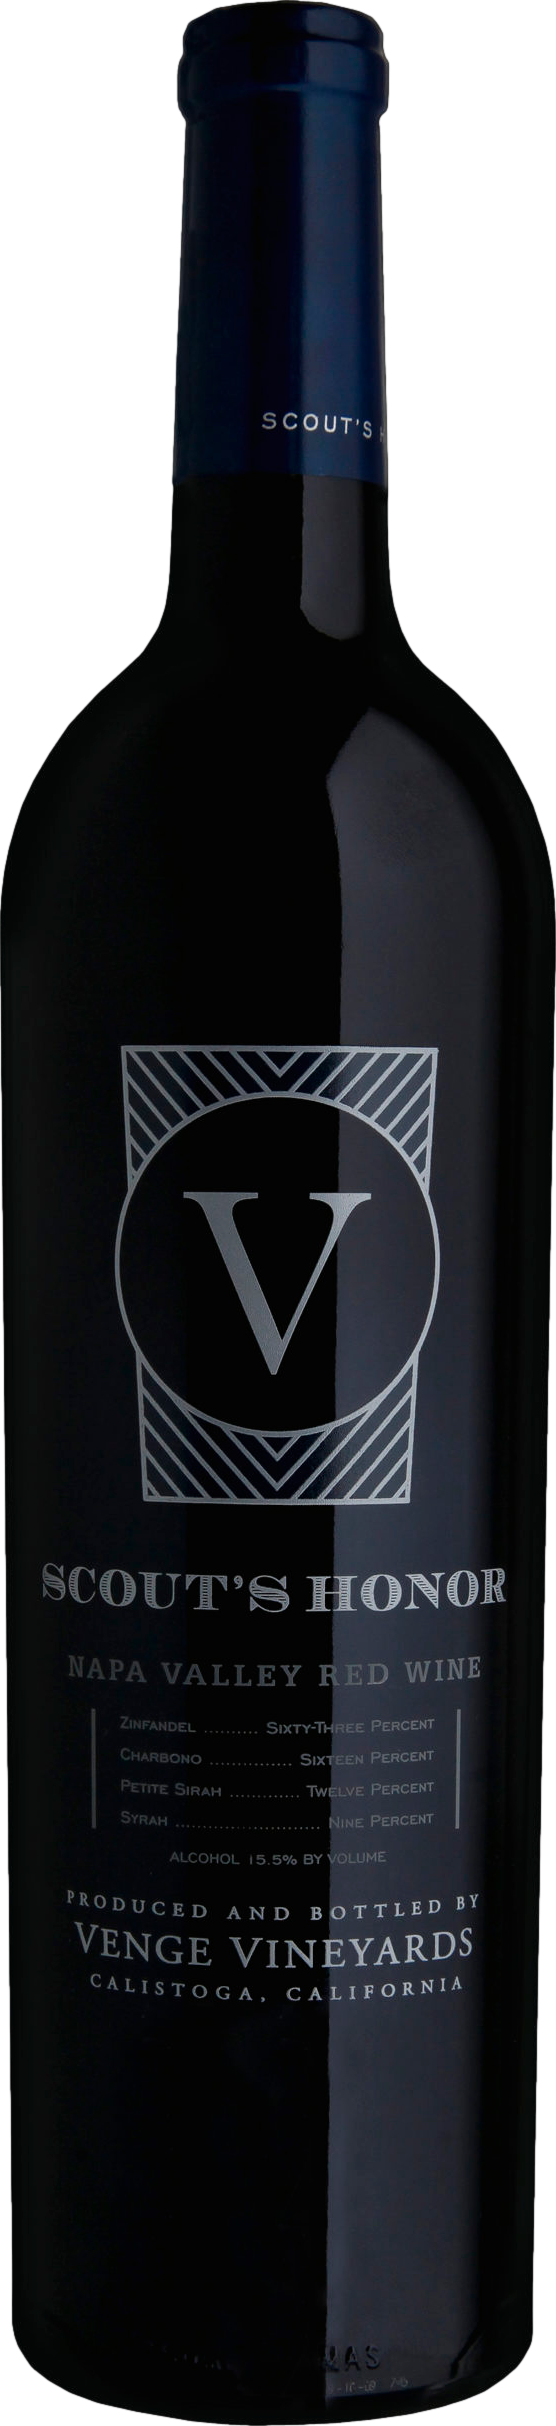 Venge Vineyards Scout's Honor Proprietary Red 2021